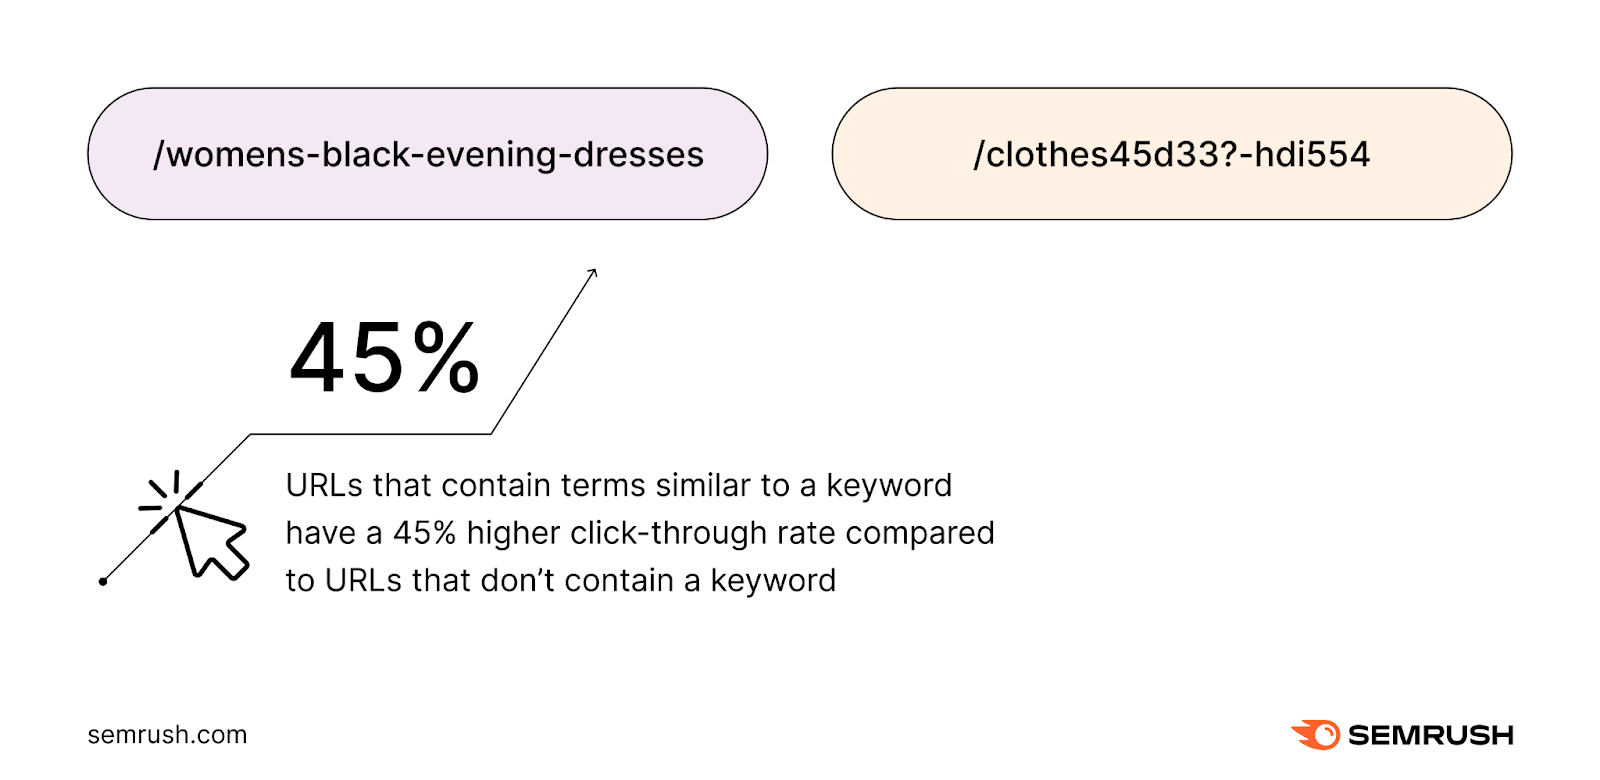 URLs with keyword terms have 45% higher click-through rates than those containing no keywords